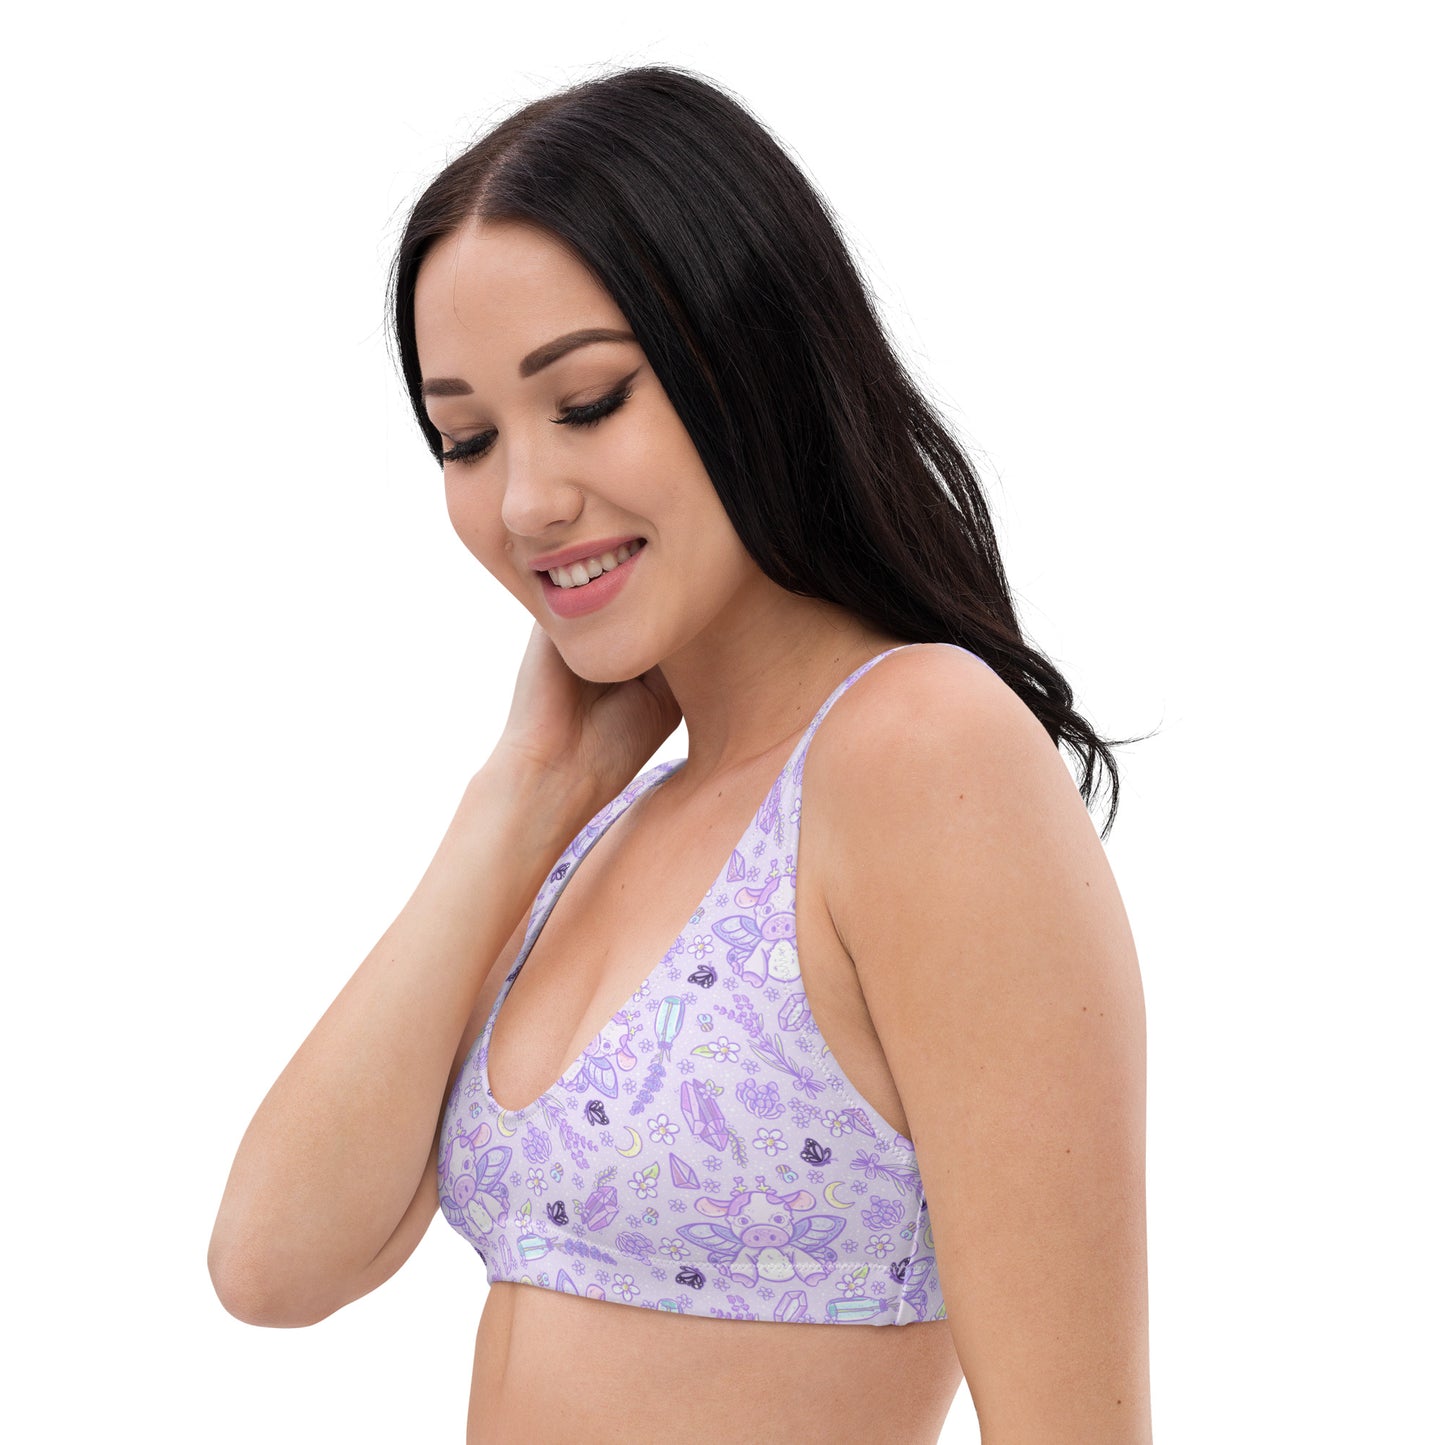 Lavender Cow padded rave top, plus size available